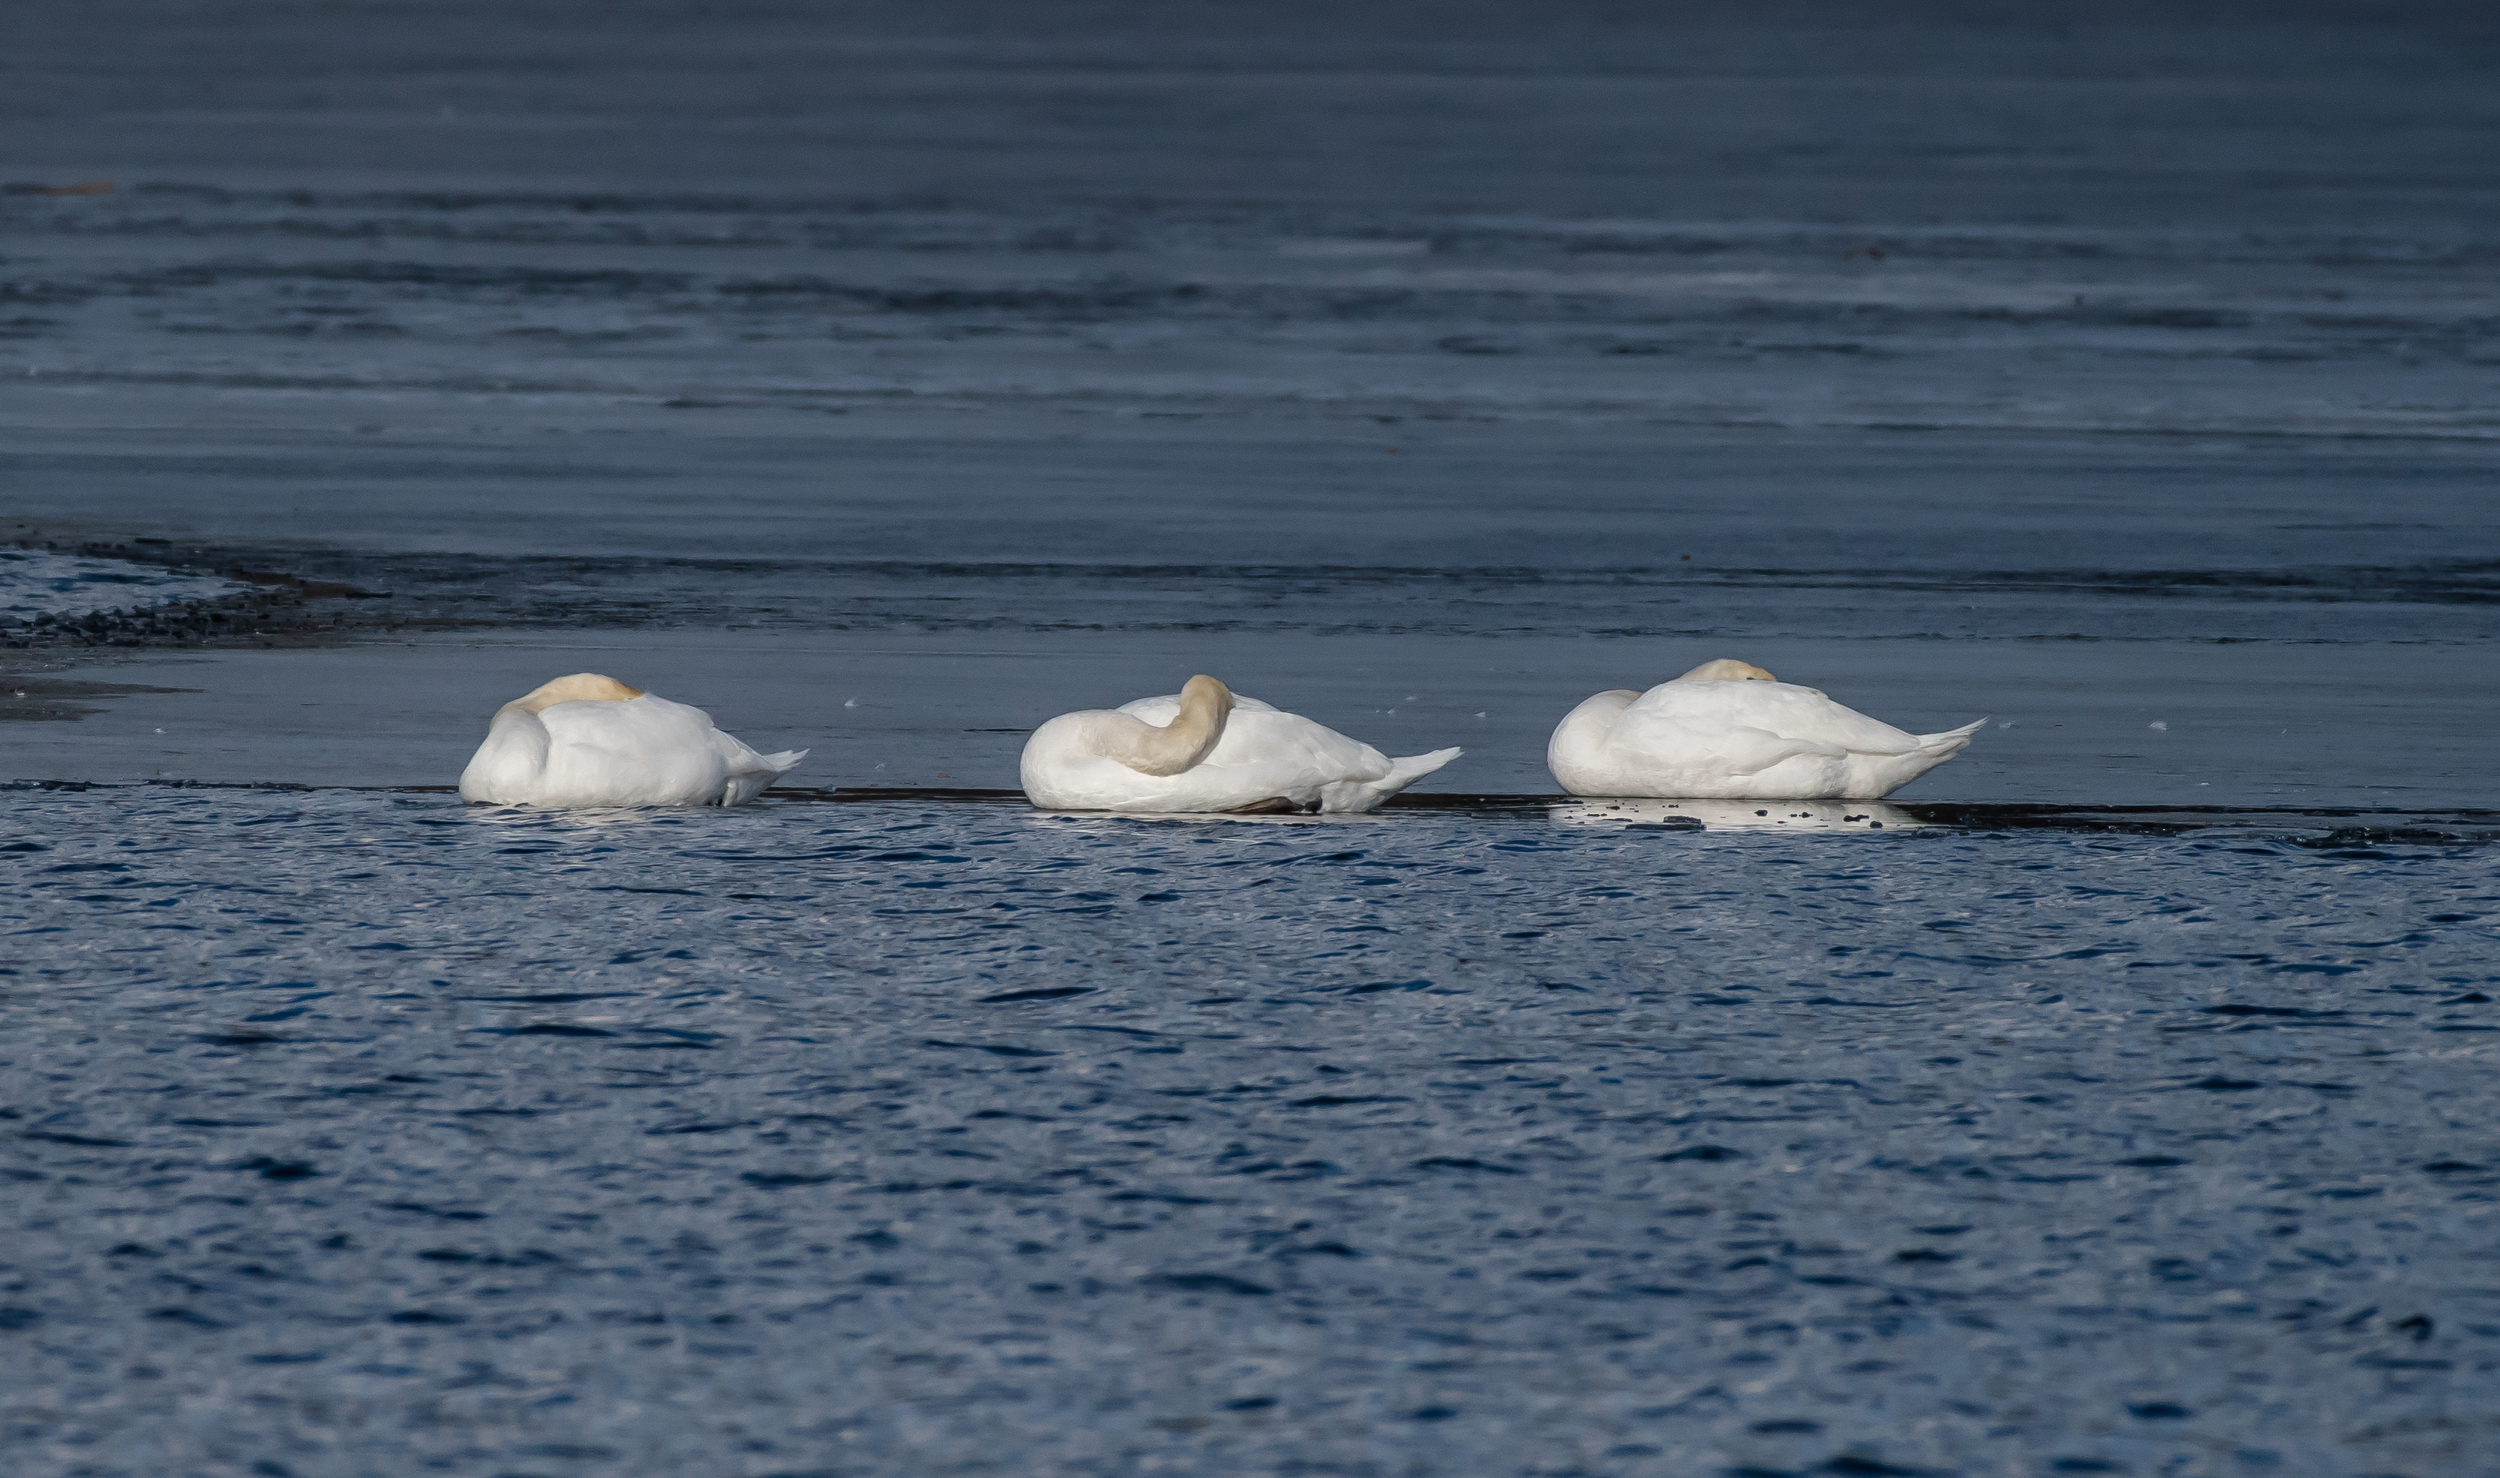 Three mute swans catching some sun and sleep on the CT. River today in Turners Falls.